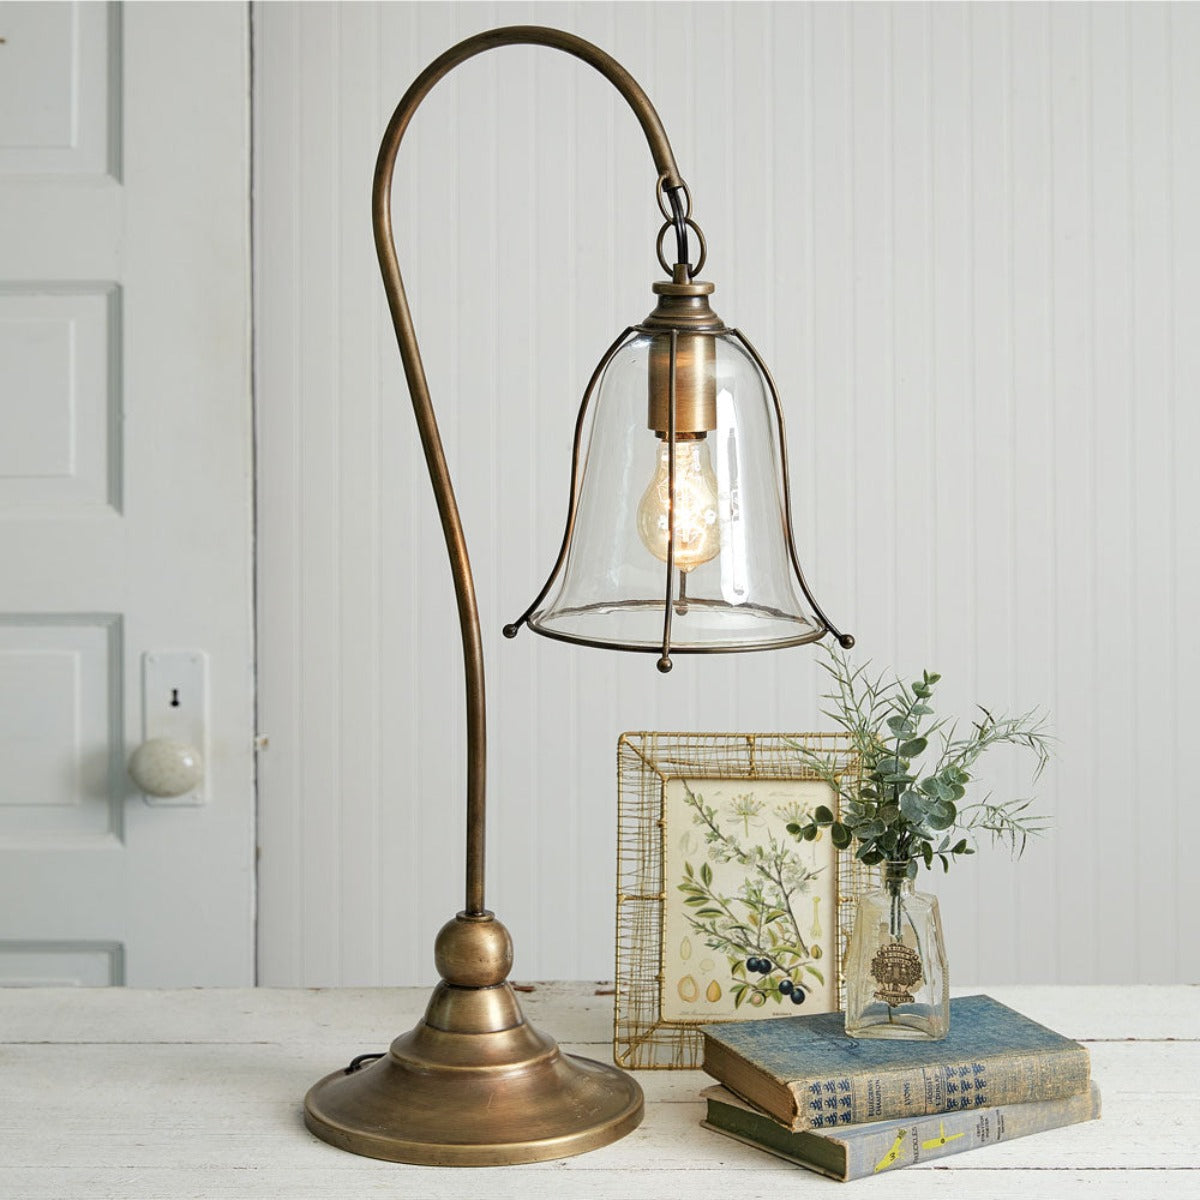 Antique Gooseneck Brass Lamp - Embrace Vintage Charm and Illuminate with  Rustic Elegance - Iron Accents